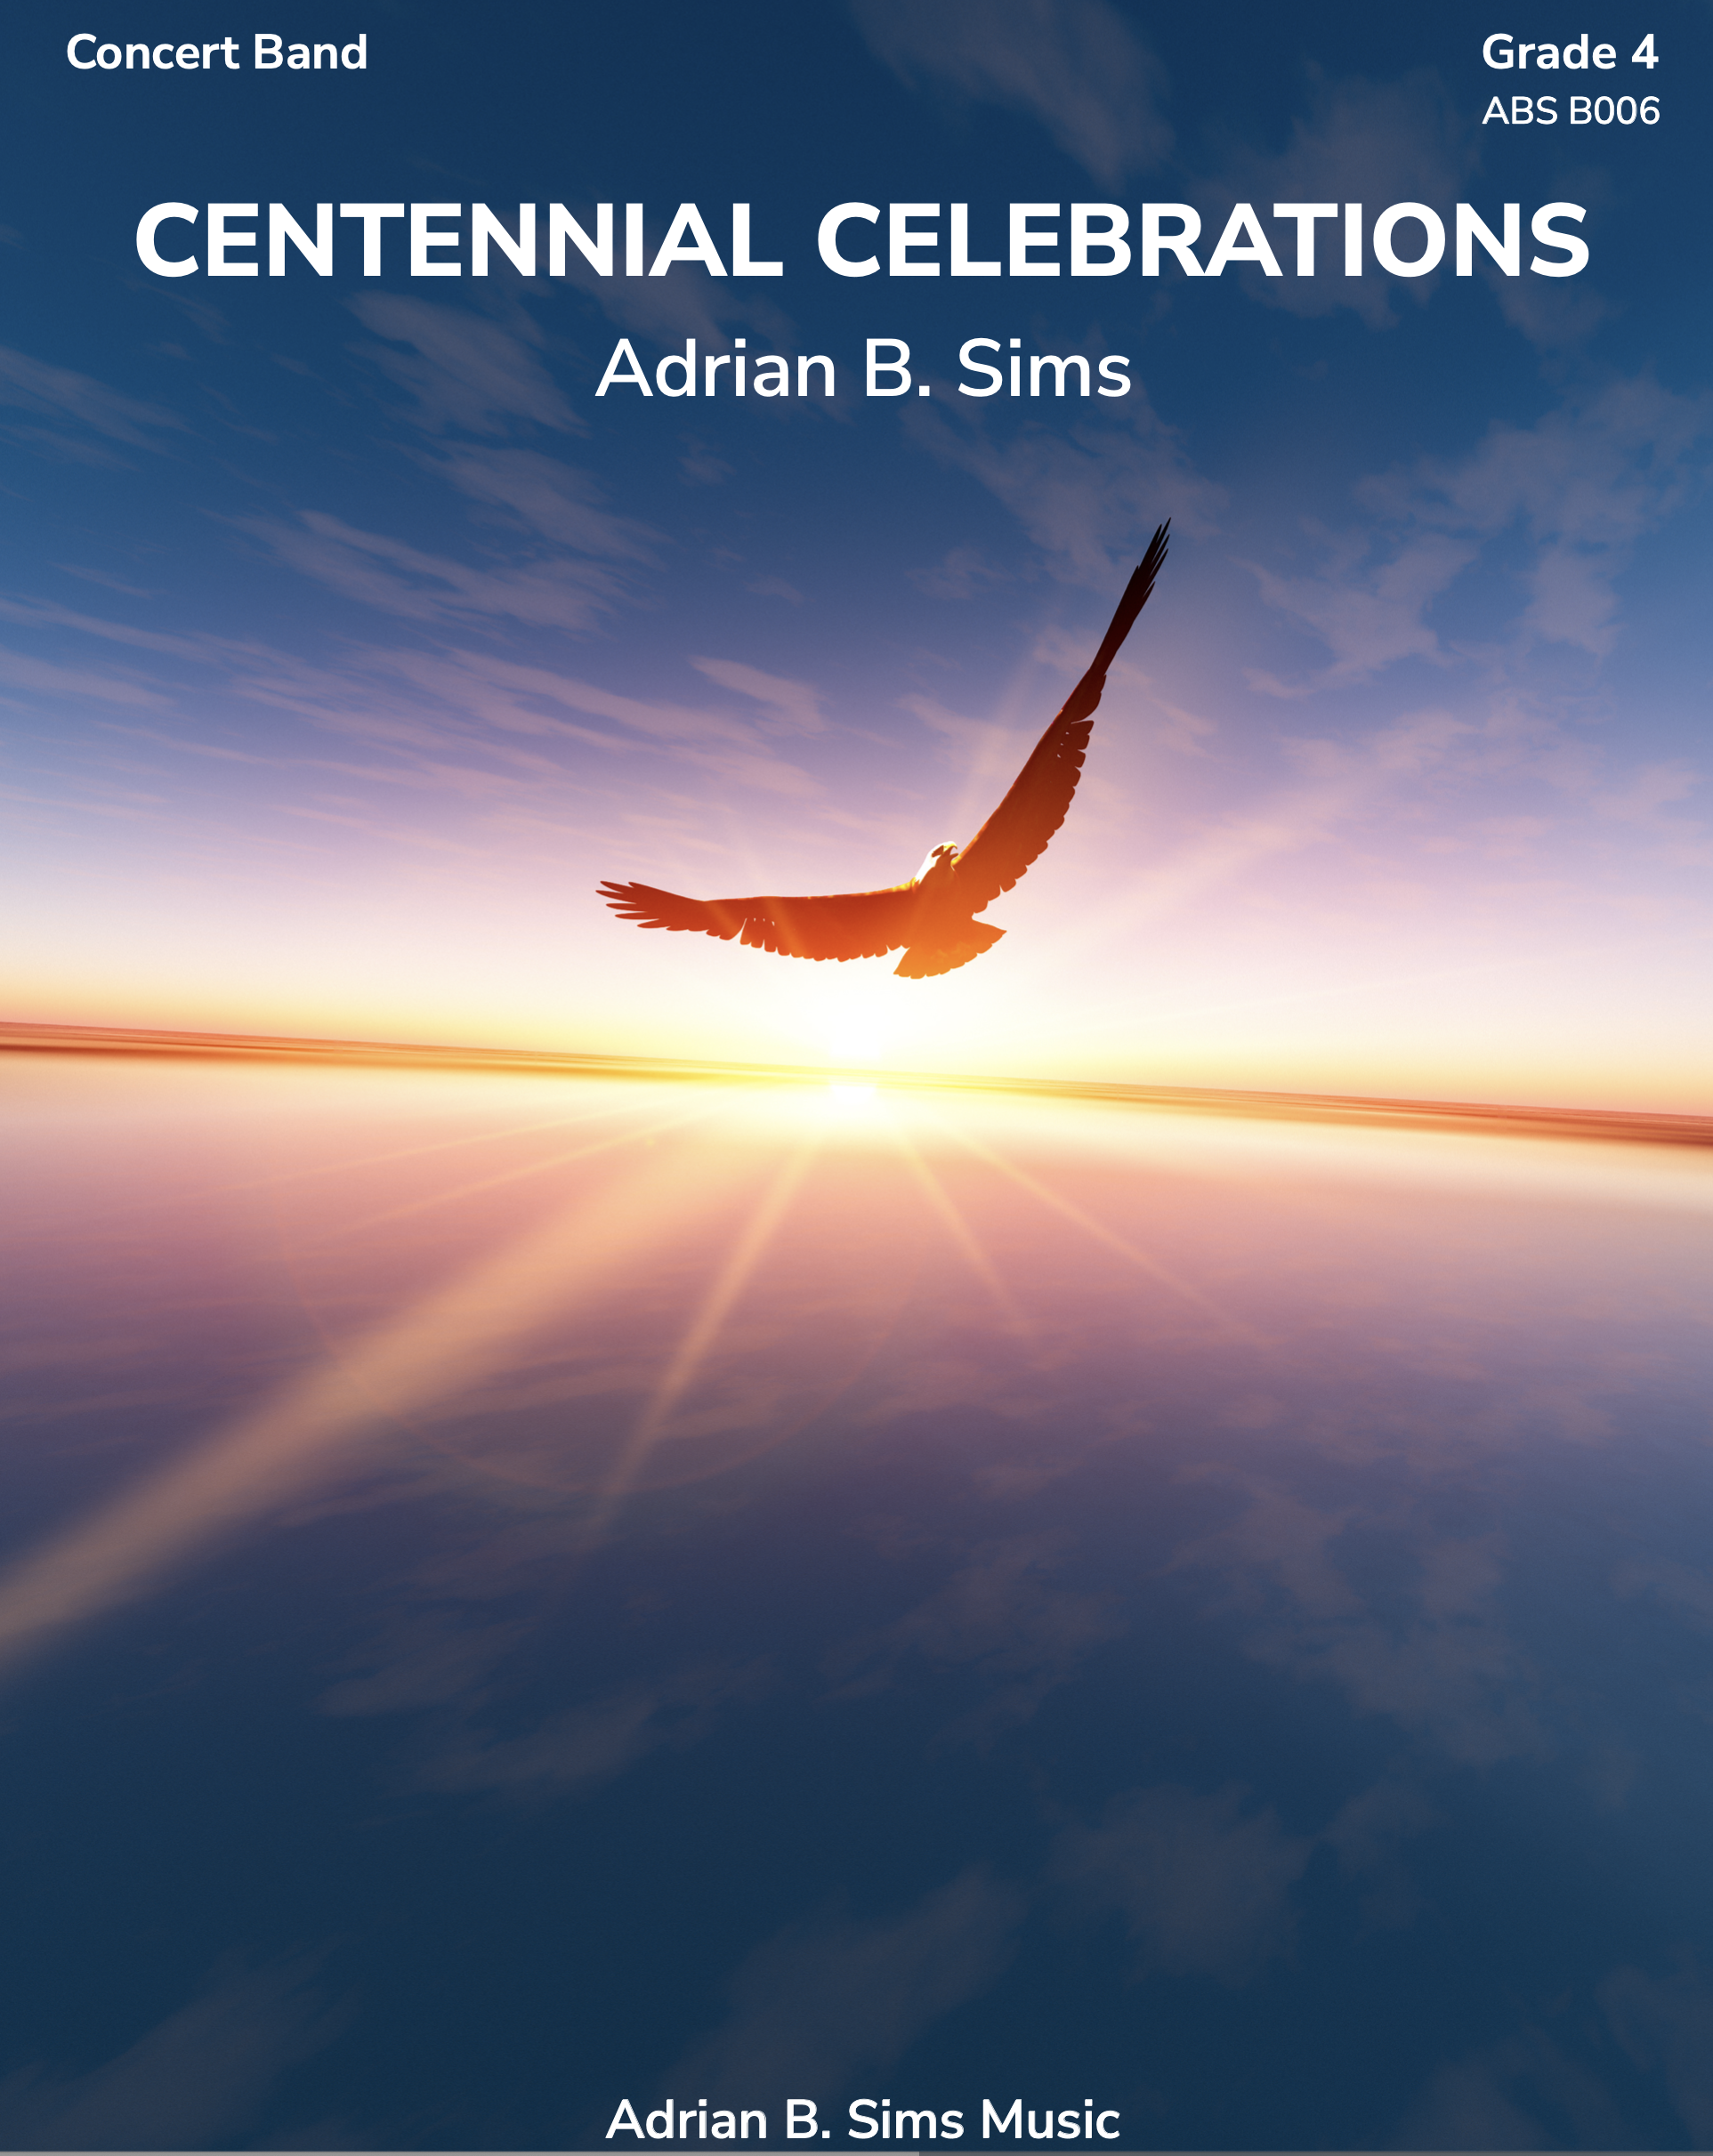 Centennial Celebrations (Score Only) by Adrian B. Sims